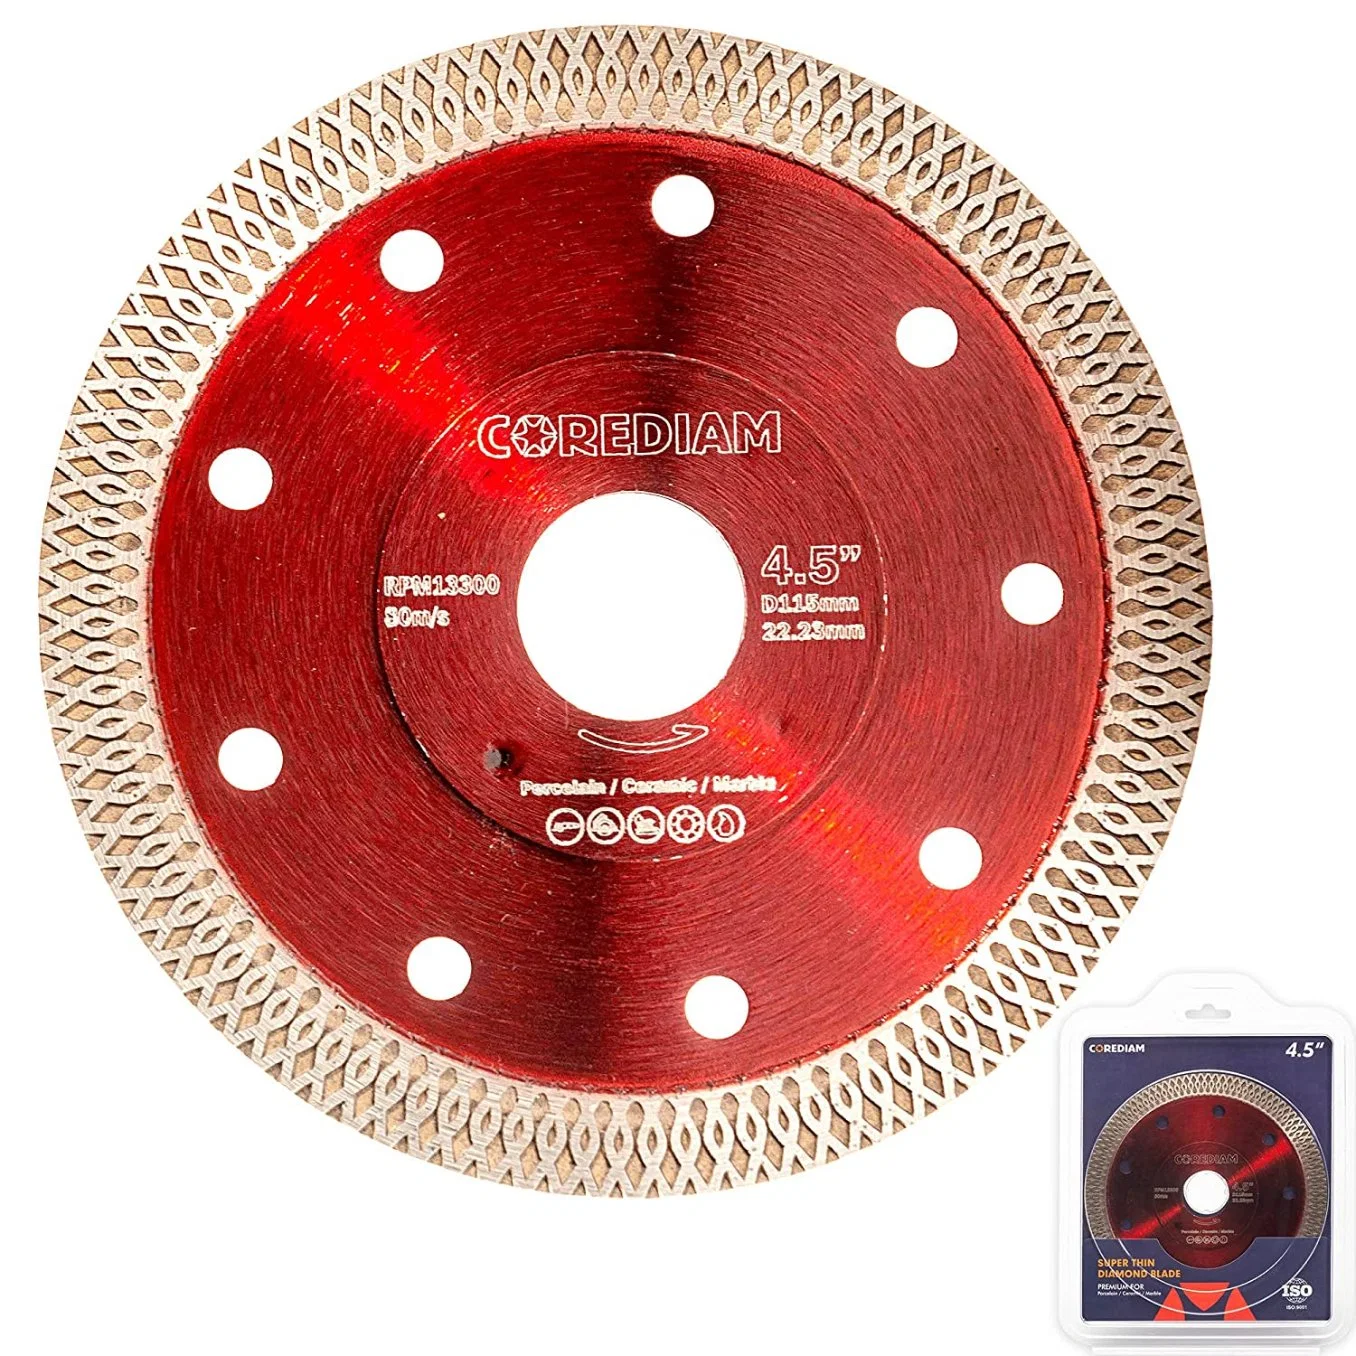 115mm Super Thin Mesh Turbo Diamond Porcelain Saw Blade De Made in China/Outils de coupe